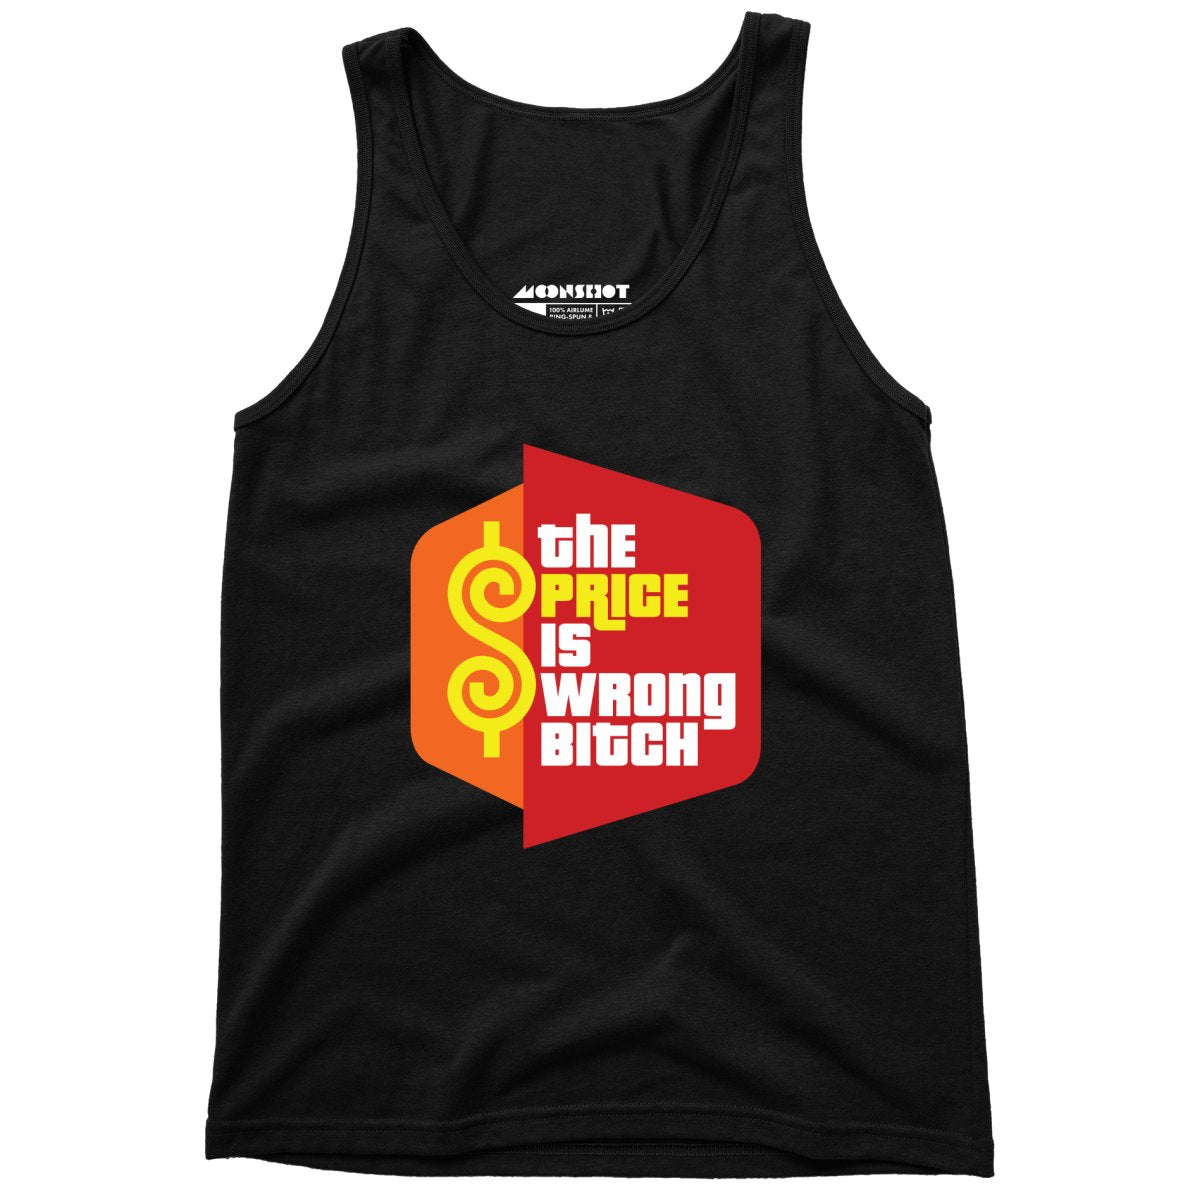 The Price is Wrong Bitch - Unisex Tank Top